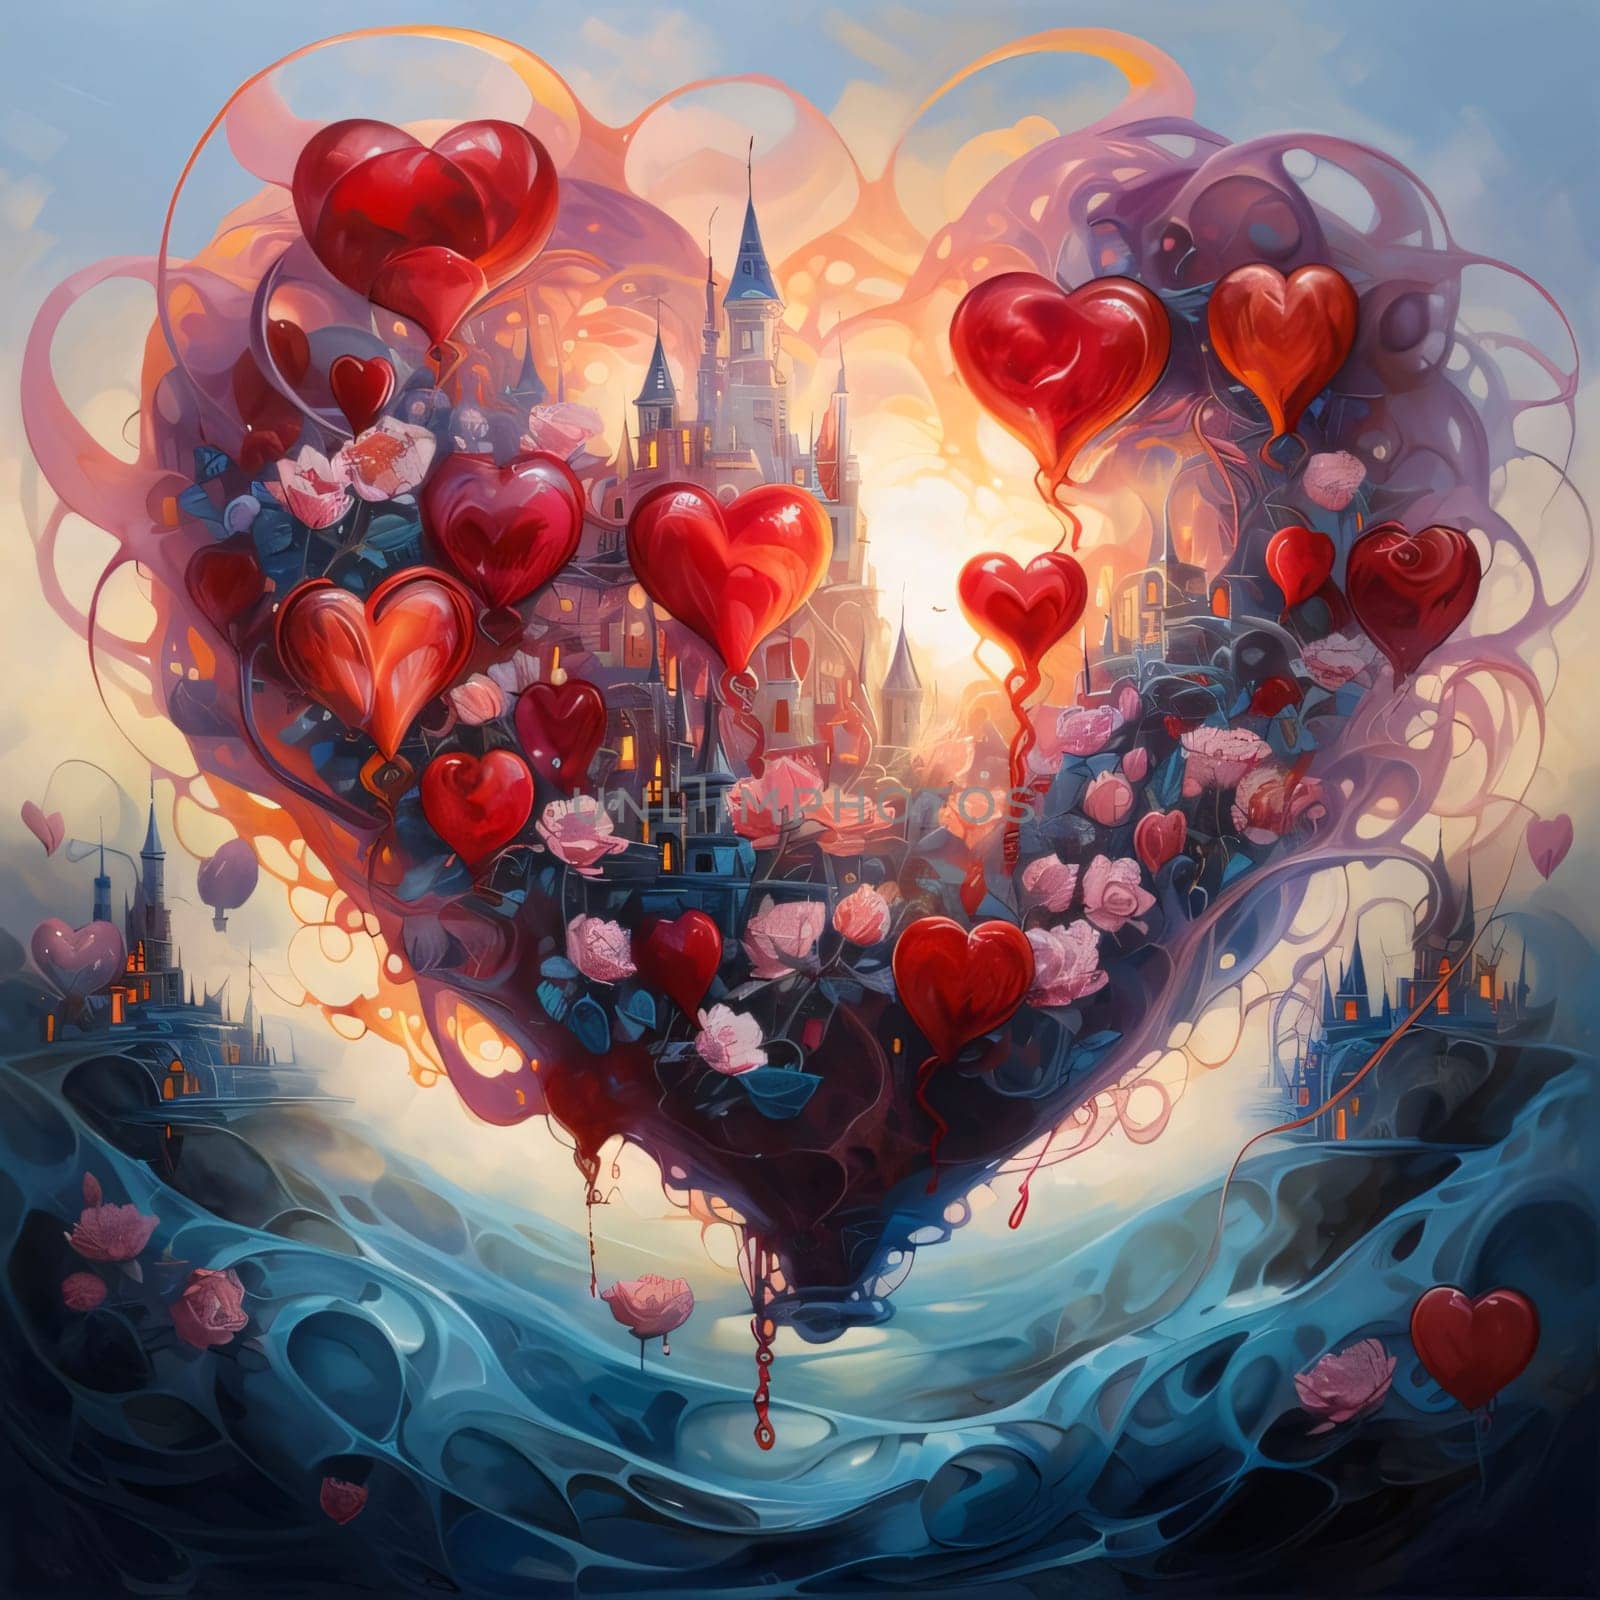 Abstract illustration of a heart made of roses and red balloons. Heart as a symbol of affection and love. The time of falling in love and love.